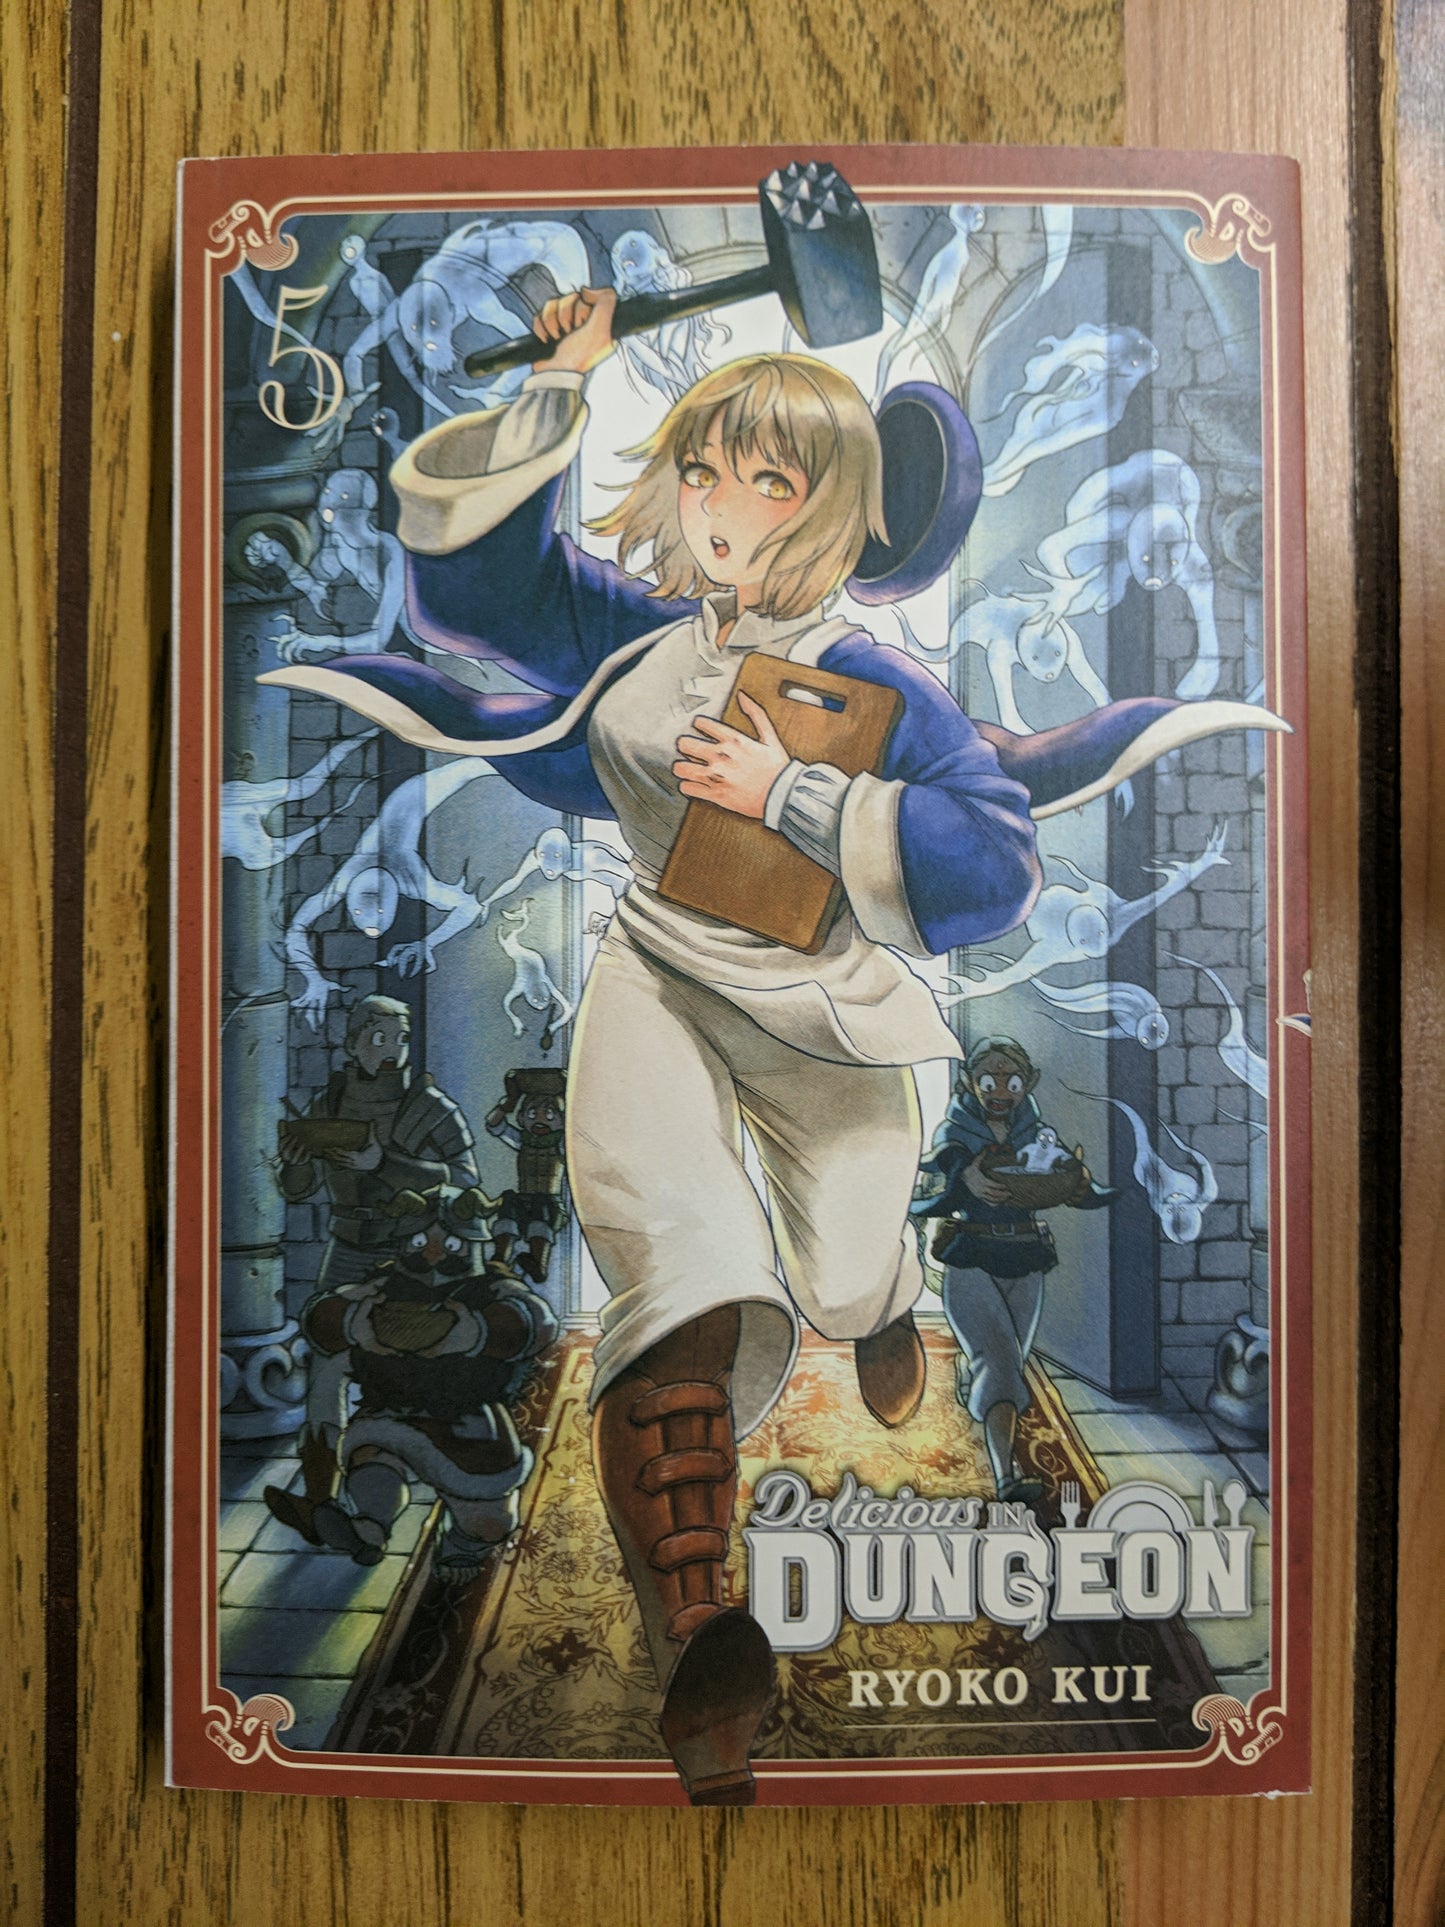 Delicious in Dungeon Vol 5